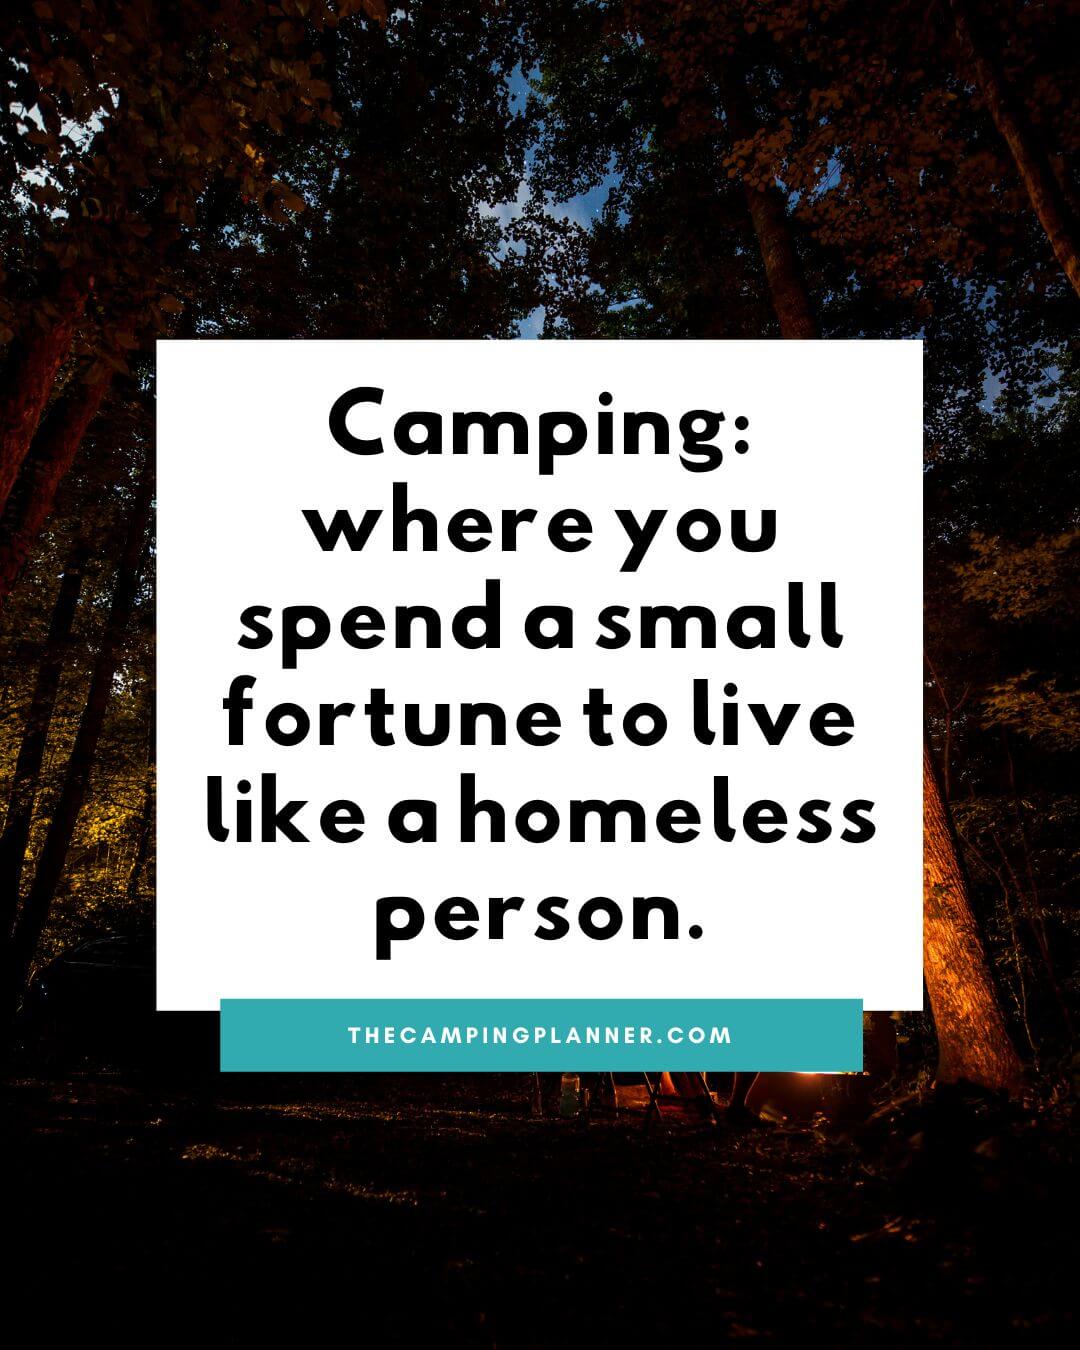 camping: where you spend a small fortune to live like a homeless person.